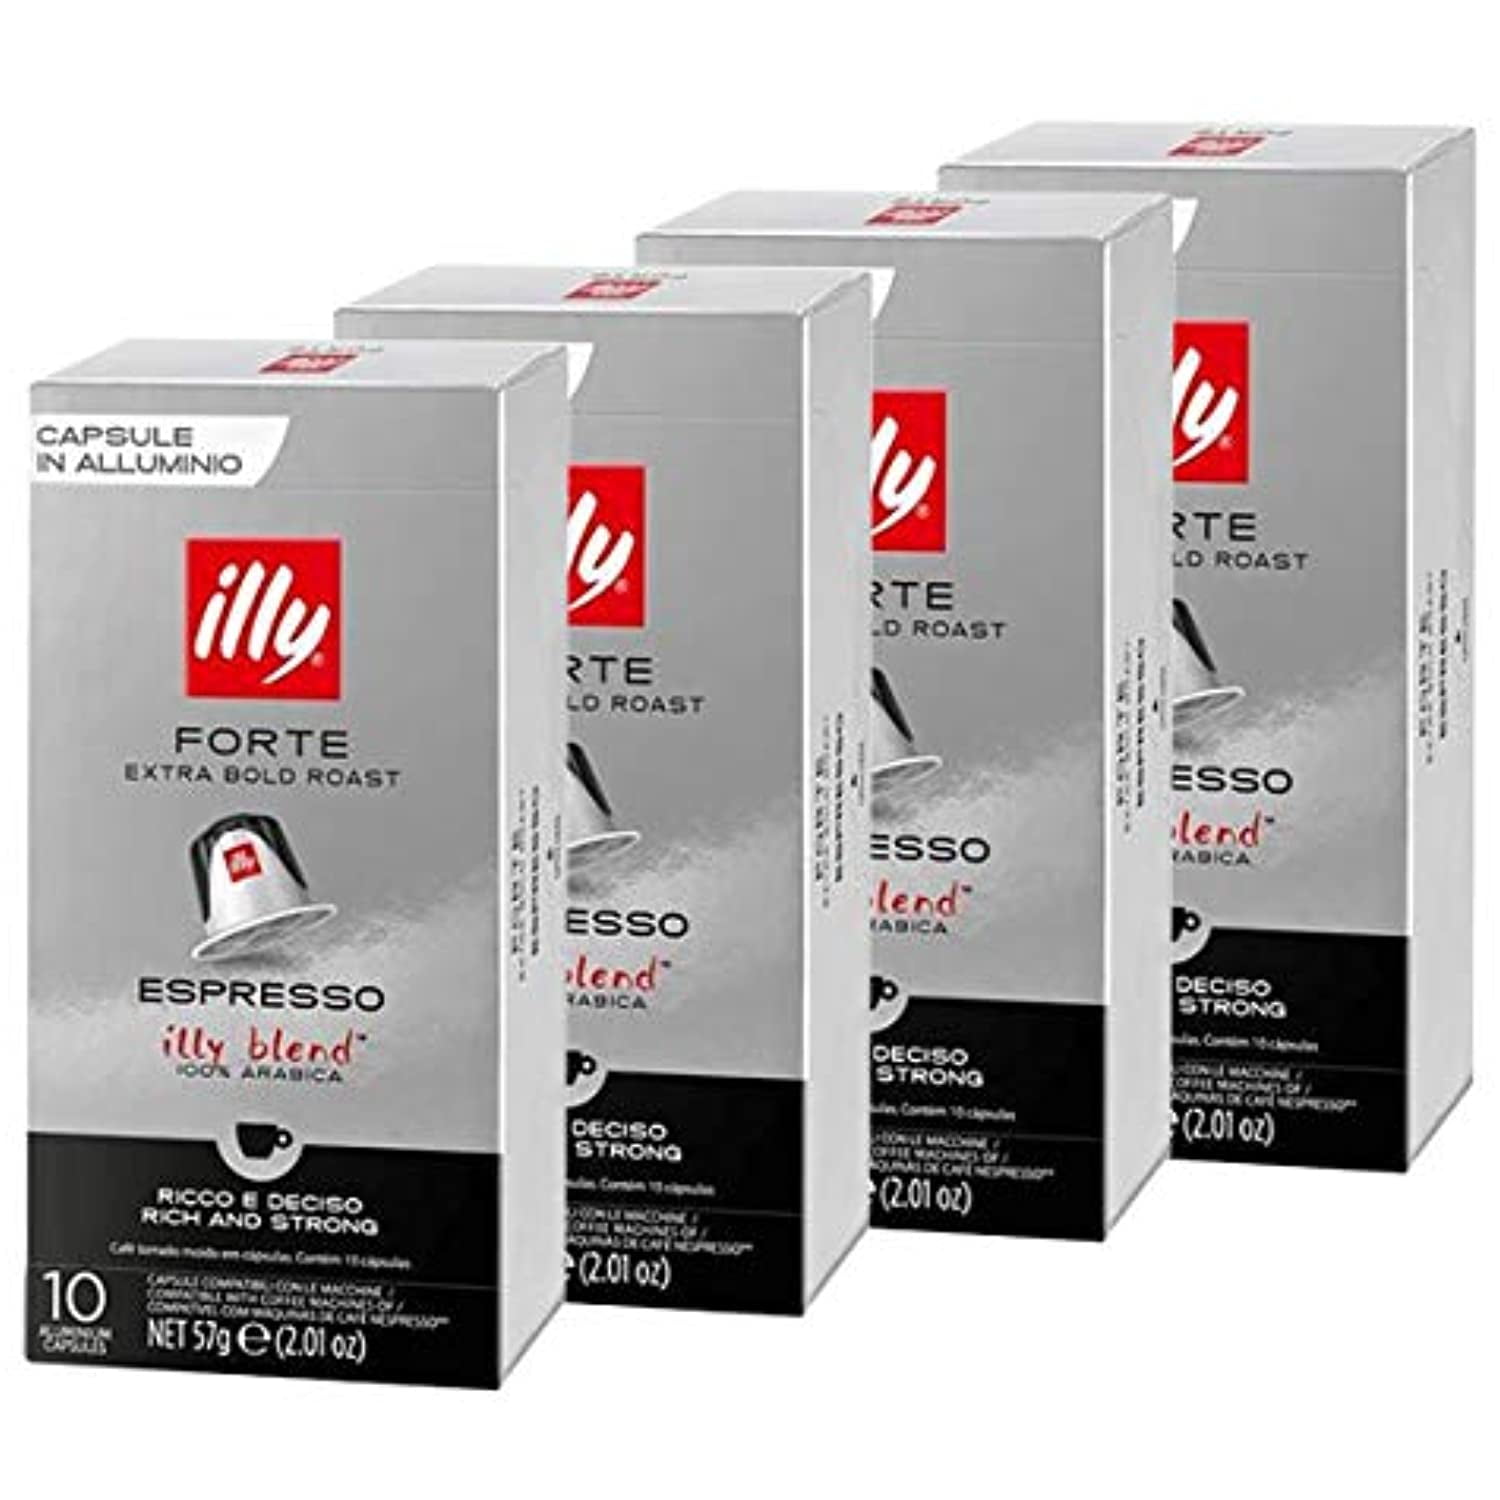 Illy Espresso Forte Coffee, Extra Bold Roast (40-Count Single Serve Capsules,  Compatible With Nespresso Original Line System Coffee Machines) 